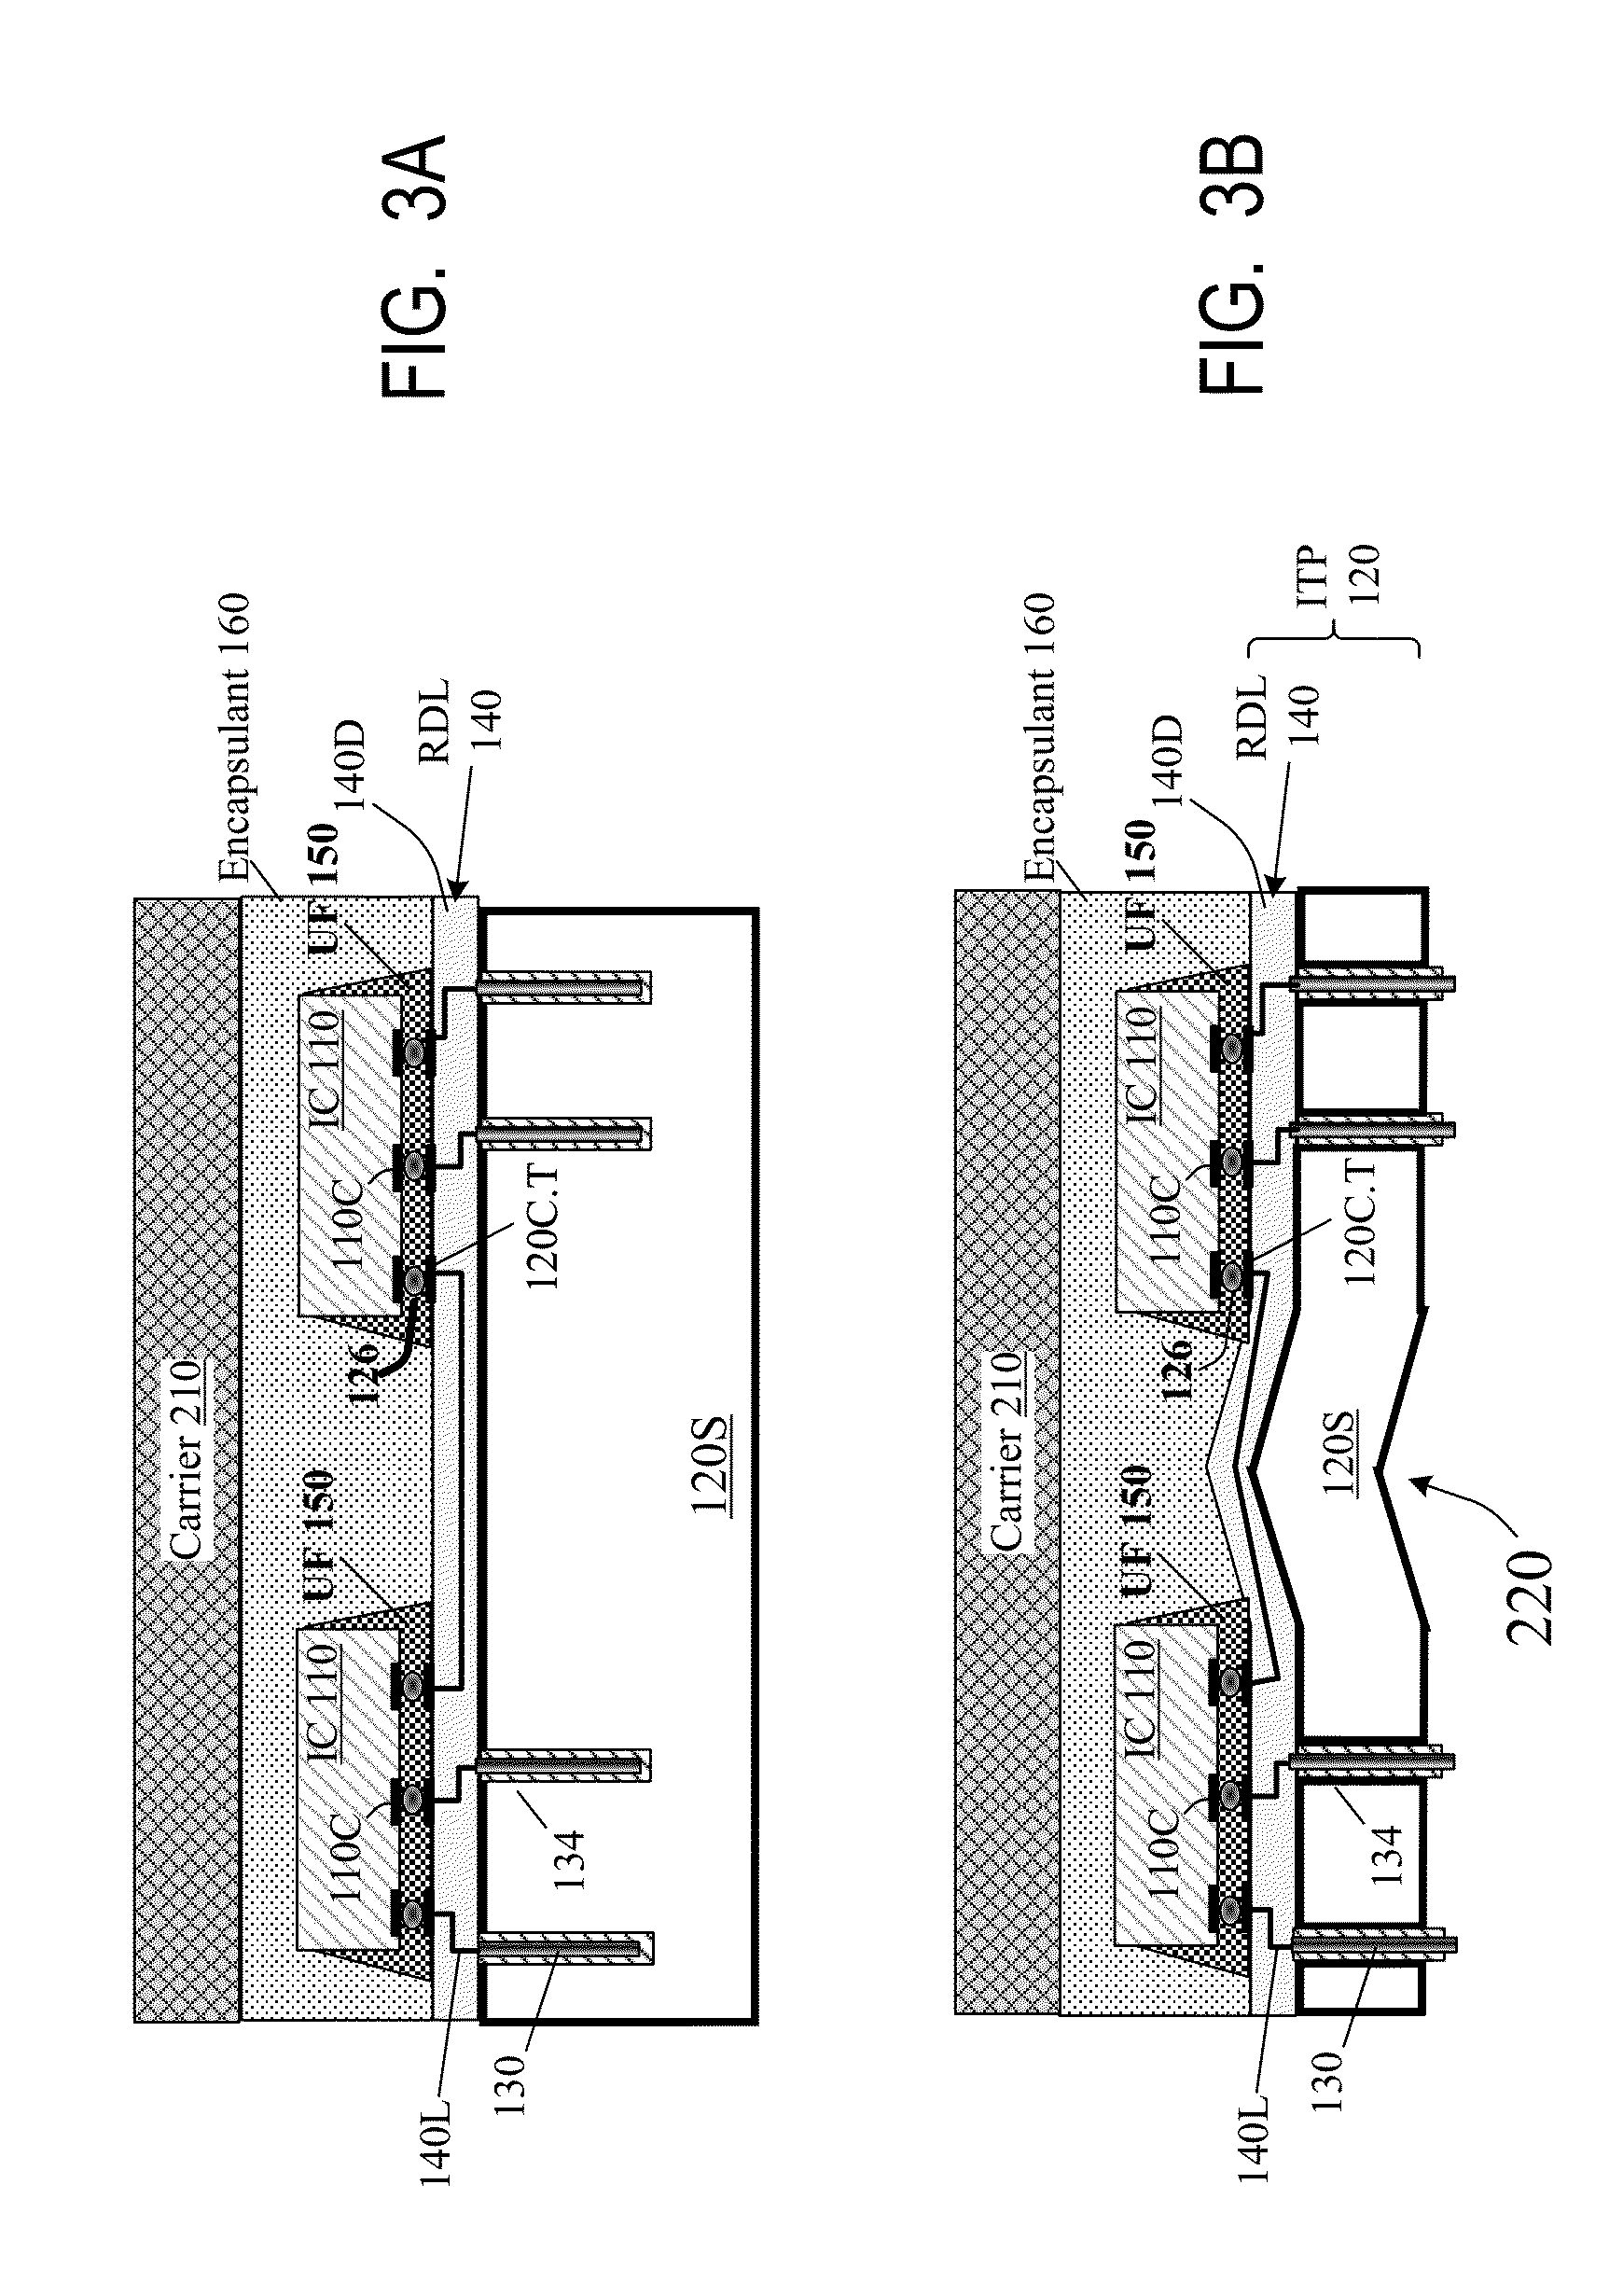 Integrated circuit assemblies with rigid layers used for protection against mechanical thinning and for other purposes, and methods of fabricating such assemblies